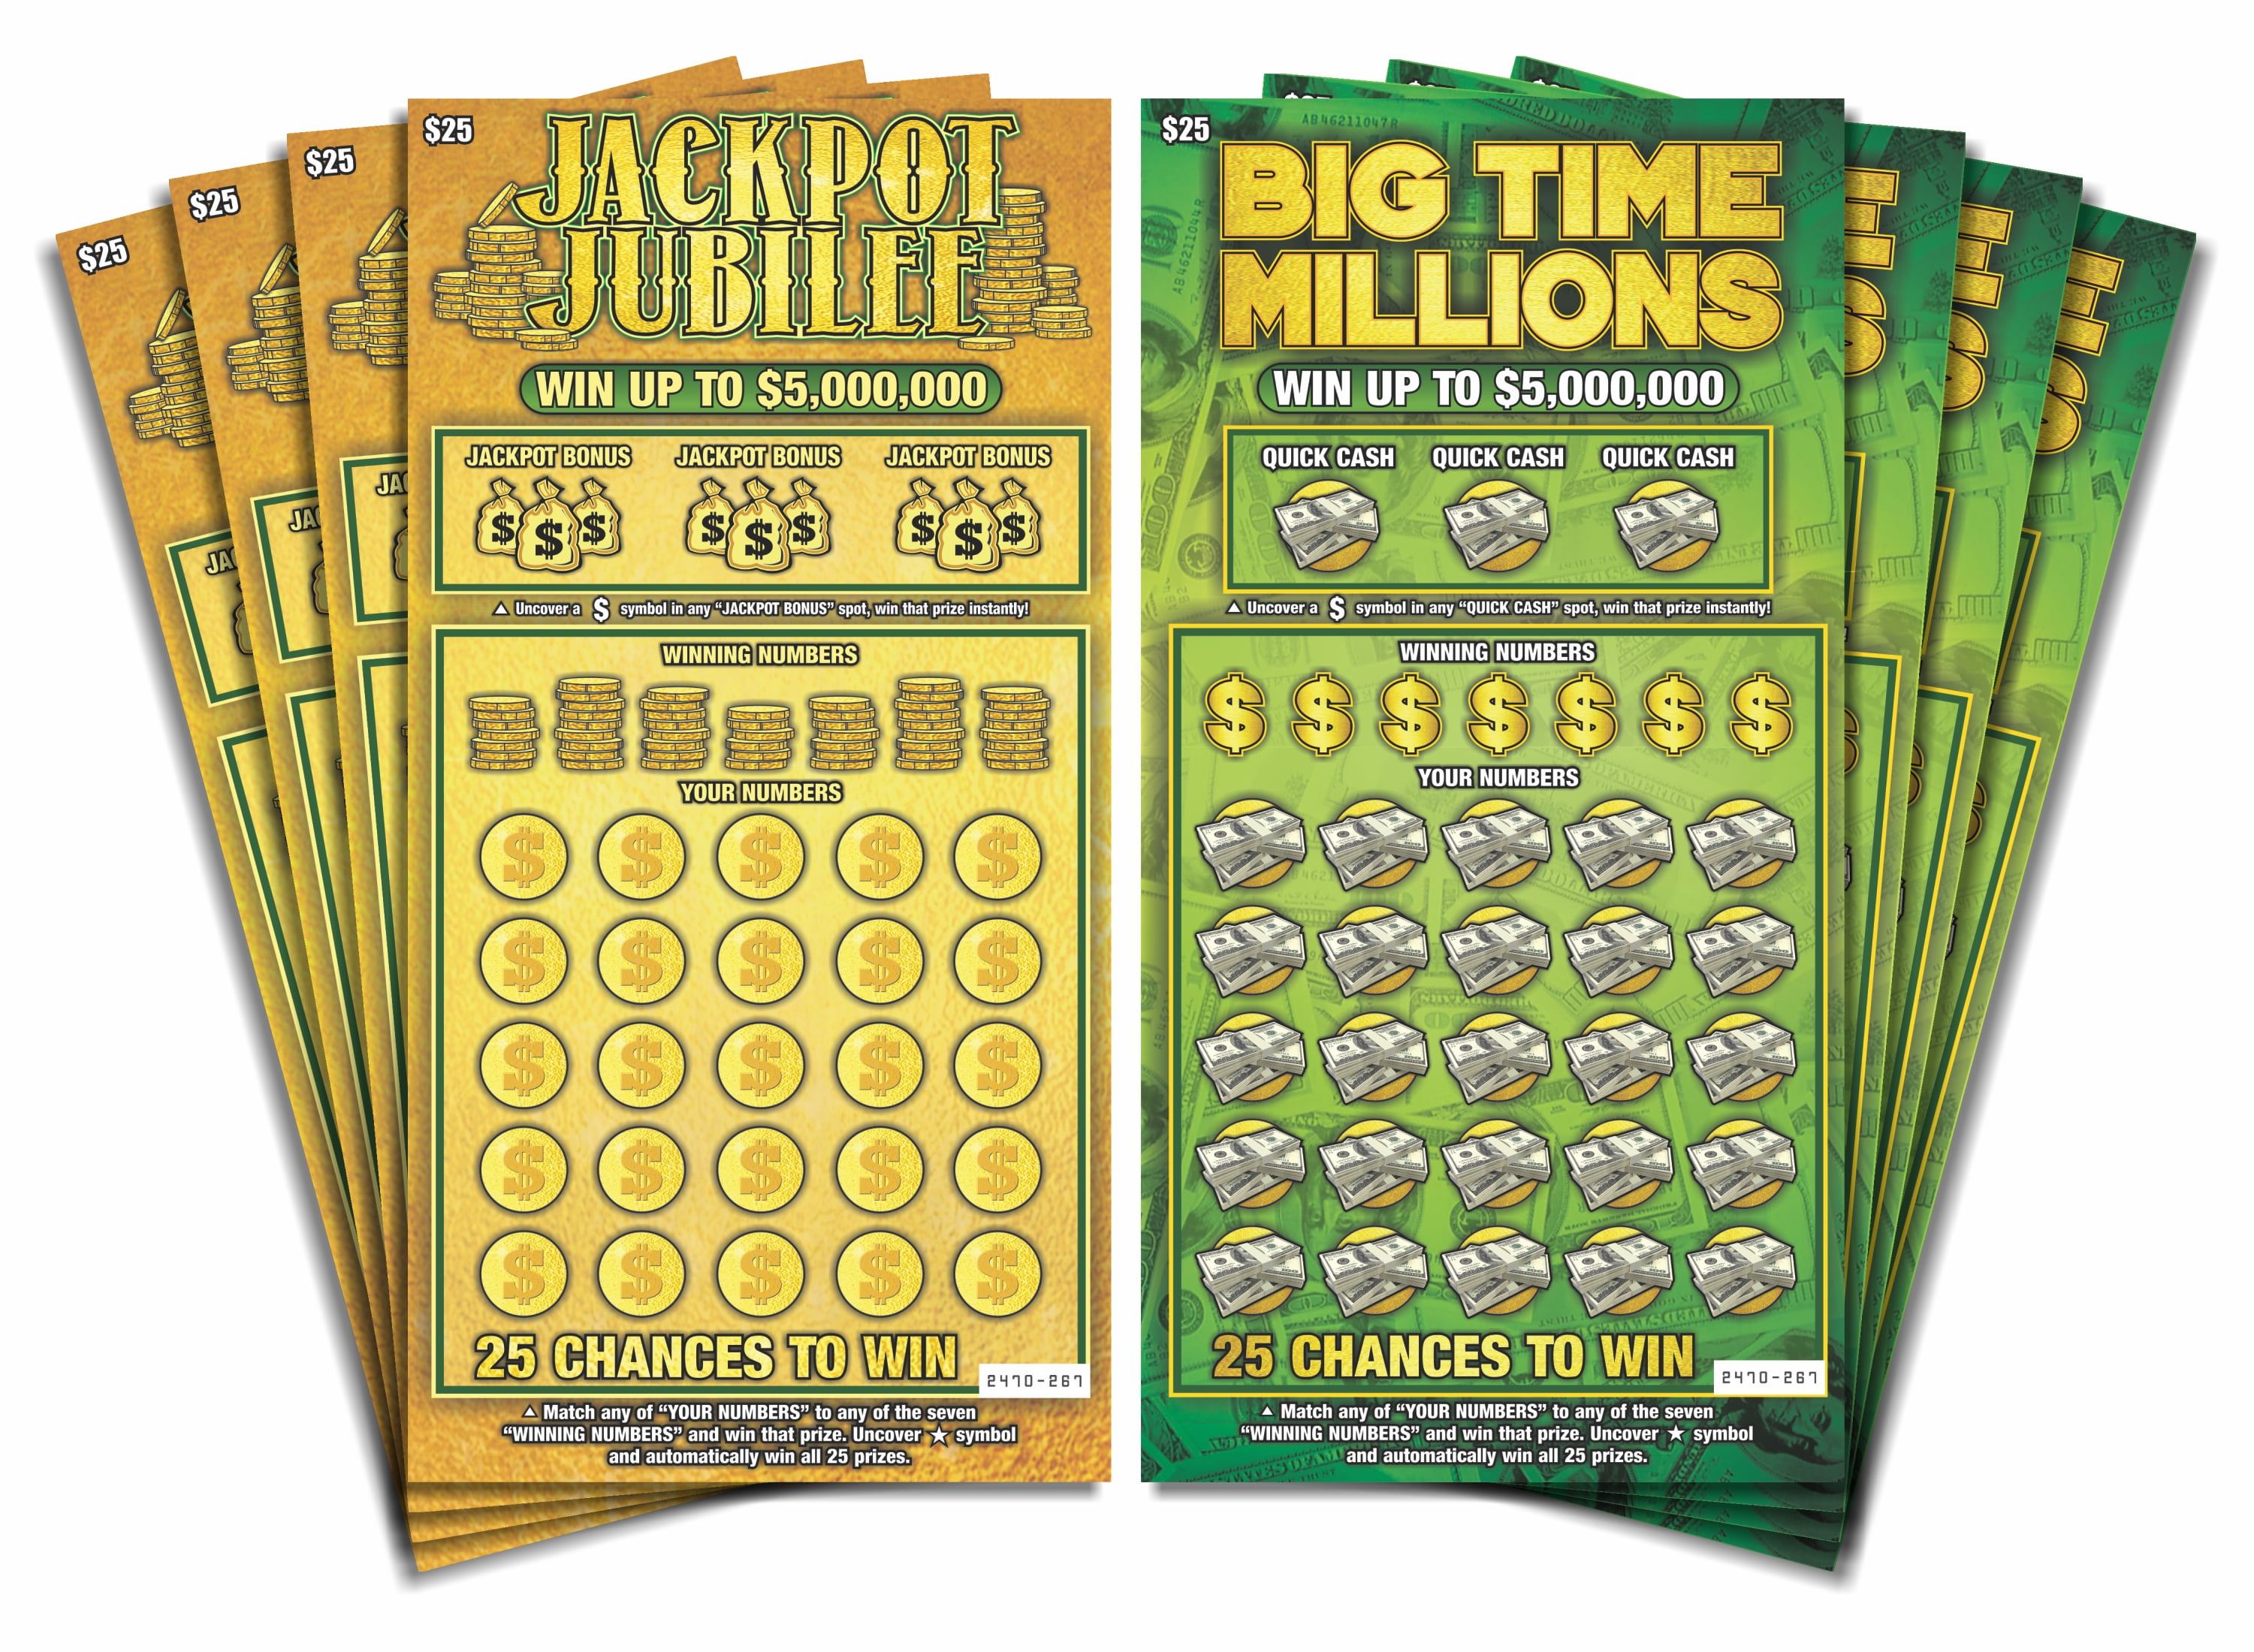 Win 10,000 All Same Design These Lottery Ticket Scratch Off Cards Look Super Real Like A Real Scratcher Joke Lotto Ticket 10 Total Tickets Larkmo Prank Gag Fake Lottery Tickets 